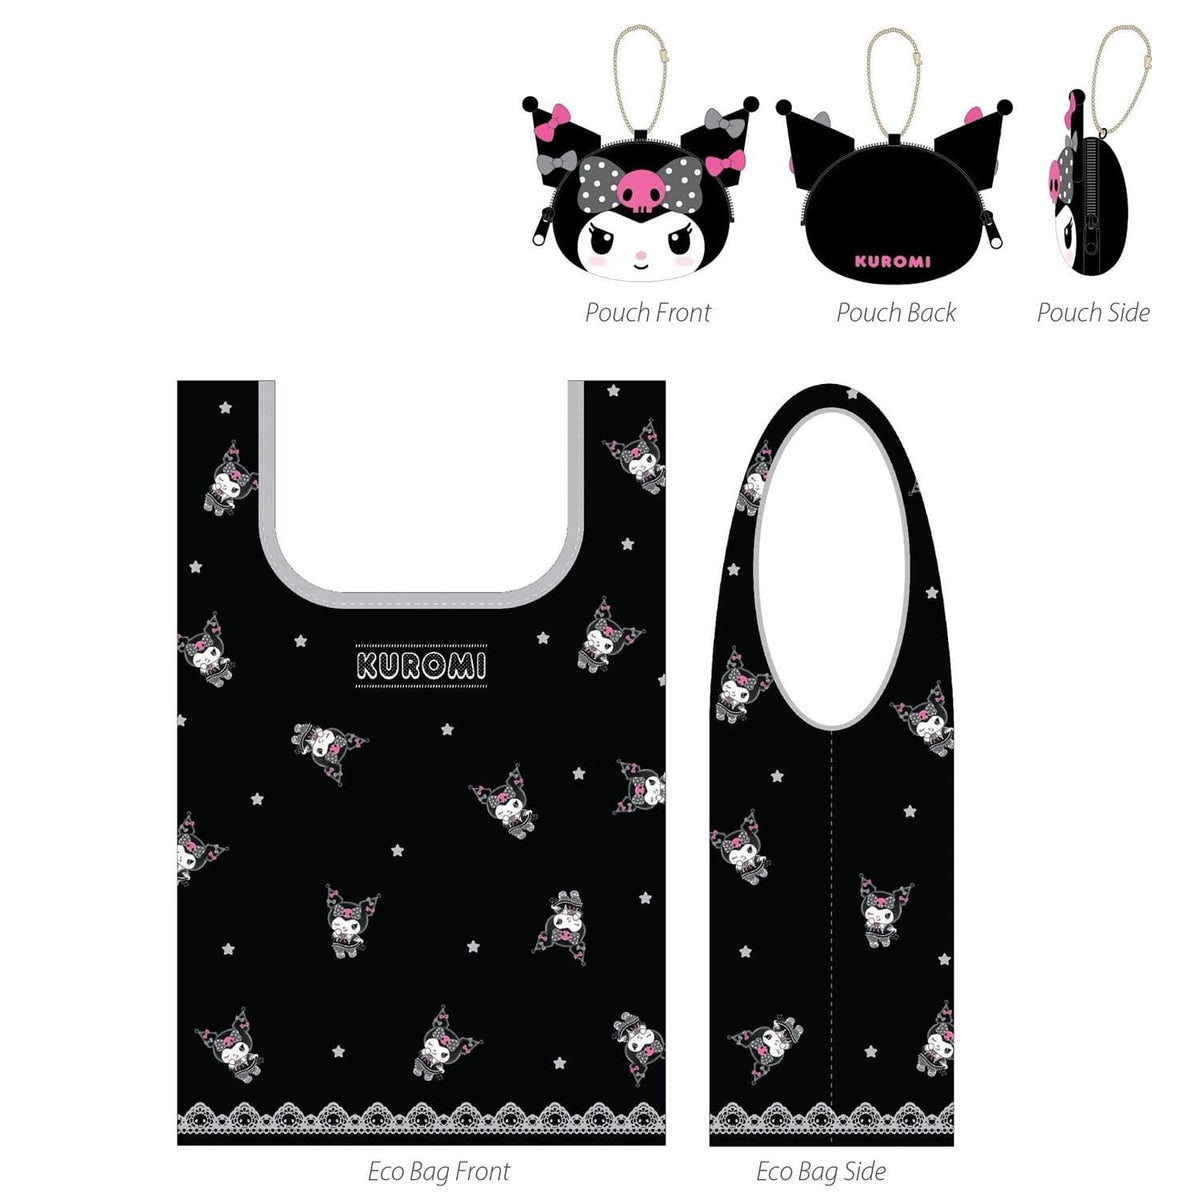 Kuromi Eco Bag in Black (Dainty Doll Collection)